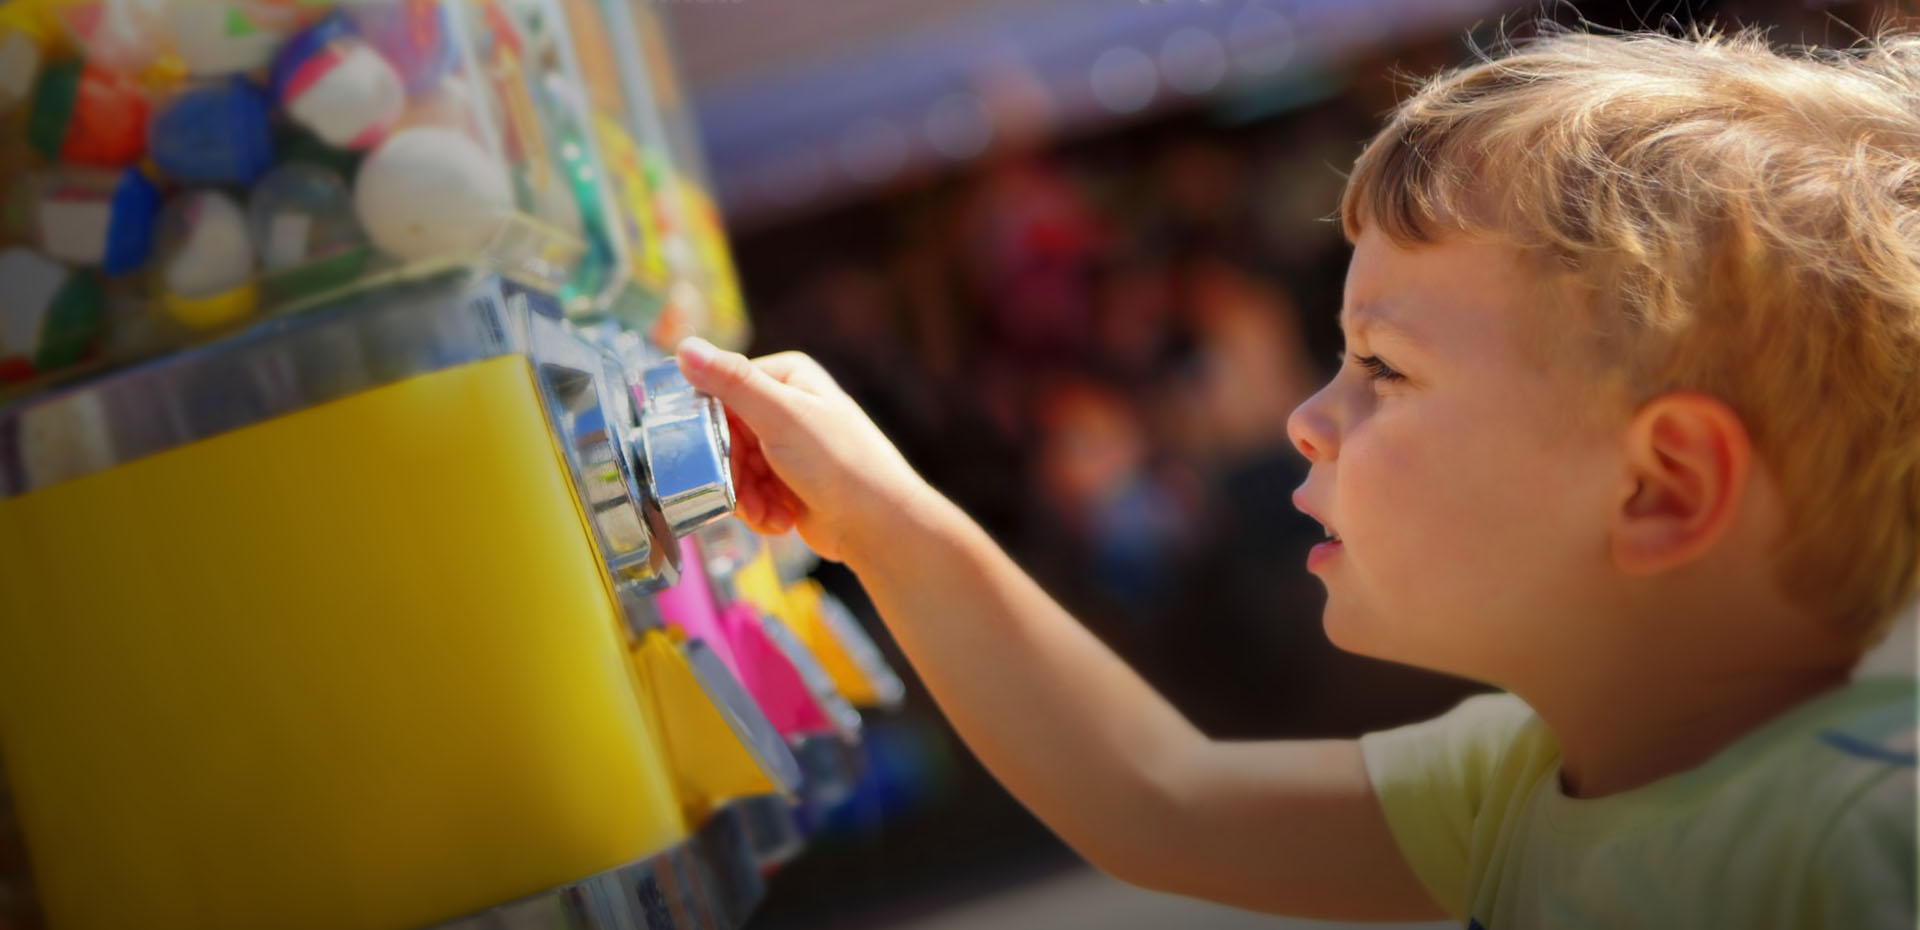 Installers Of Toys Vending Machines For Shopping Centres